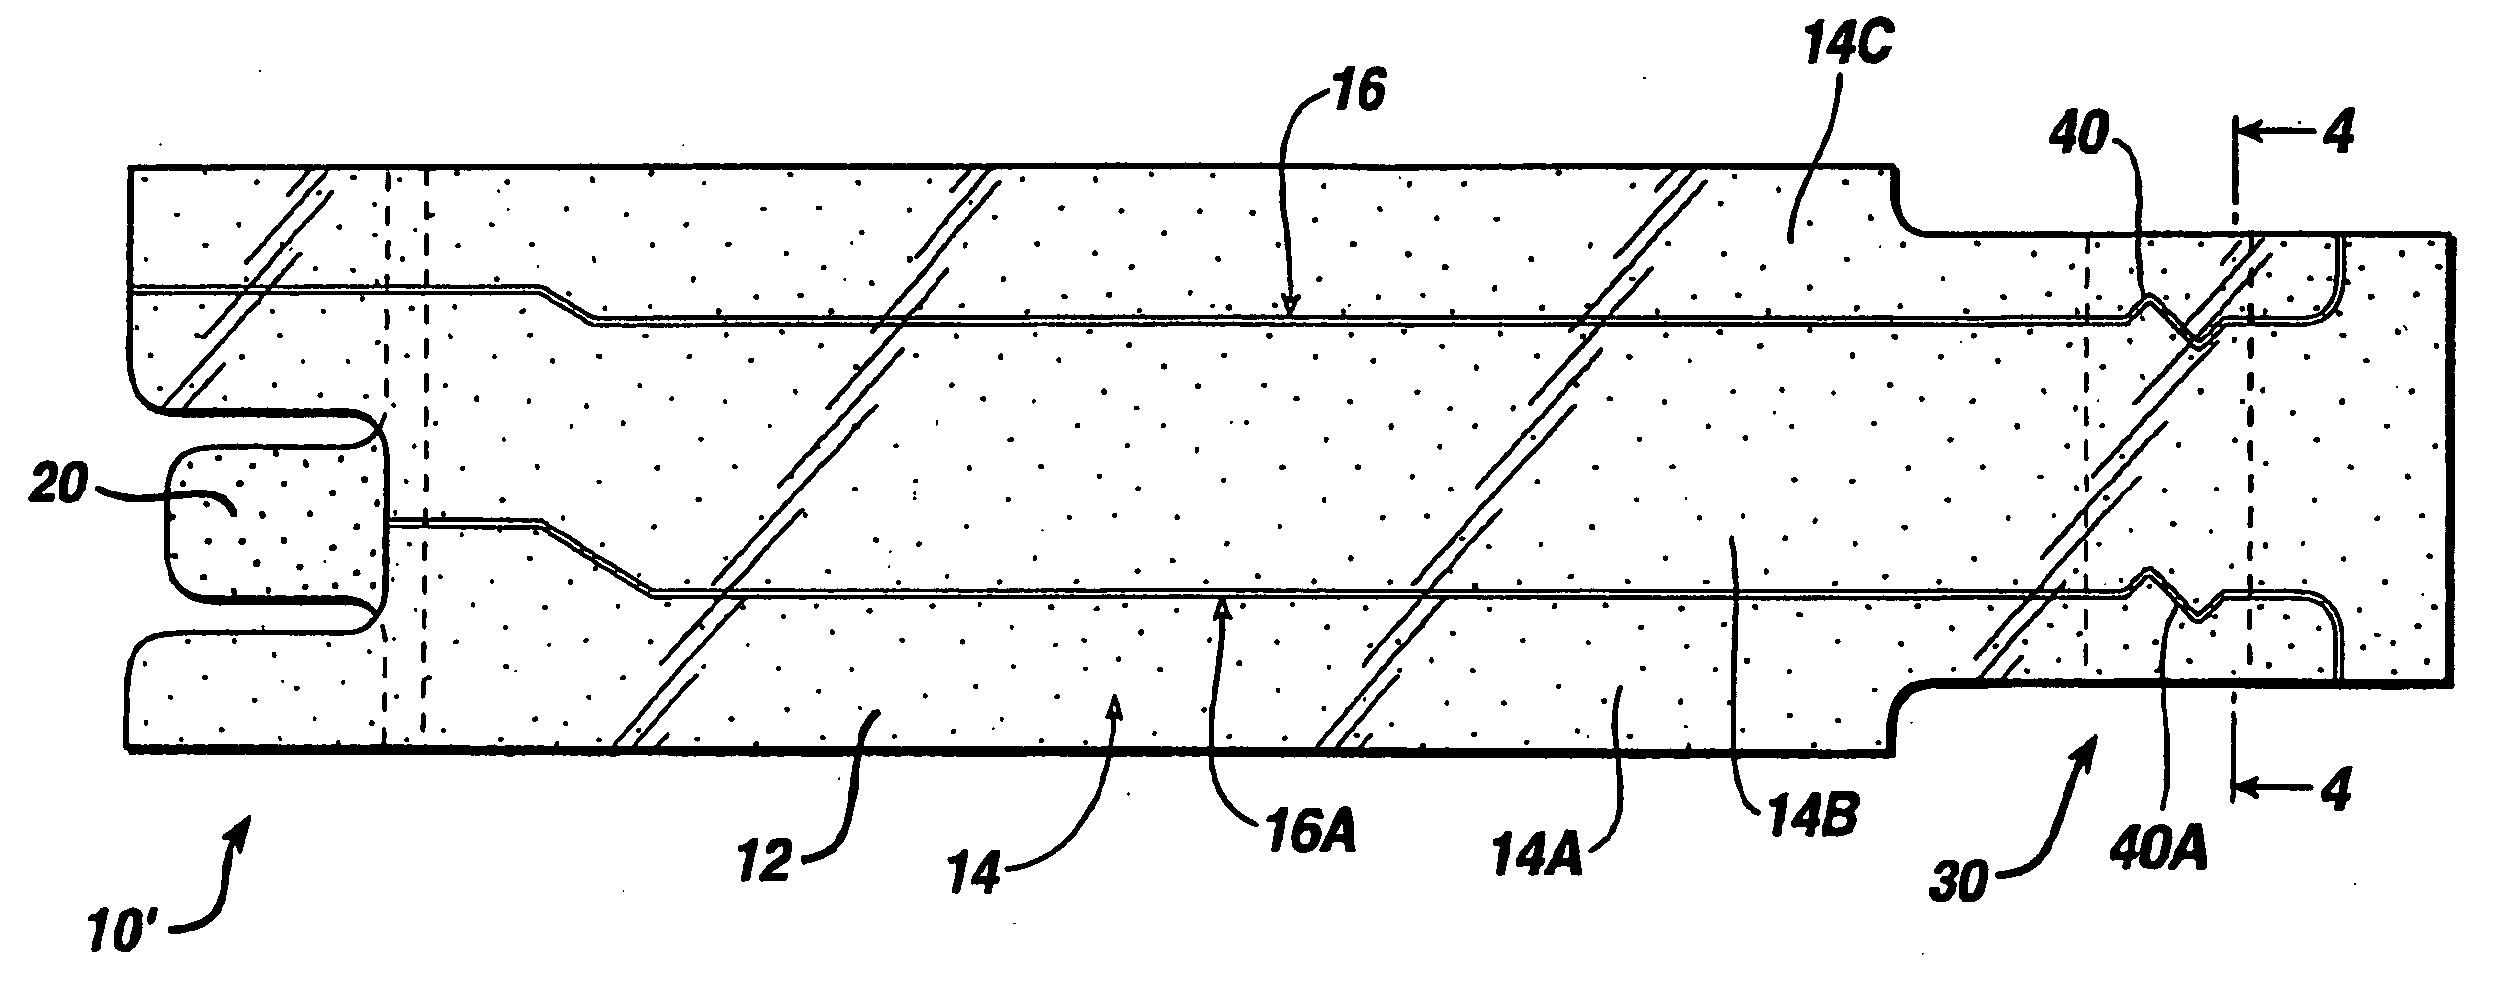 Electrically-conductive patterns for monitoring the filling of medical devices